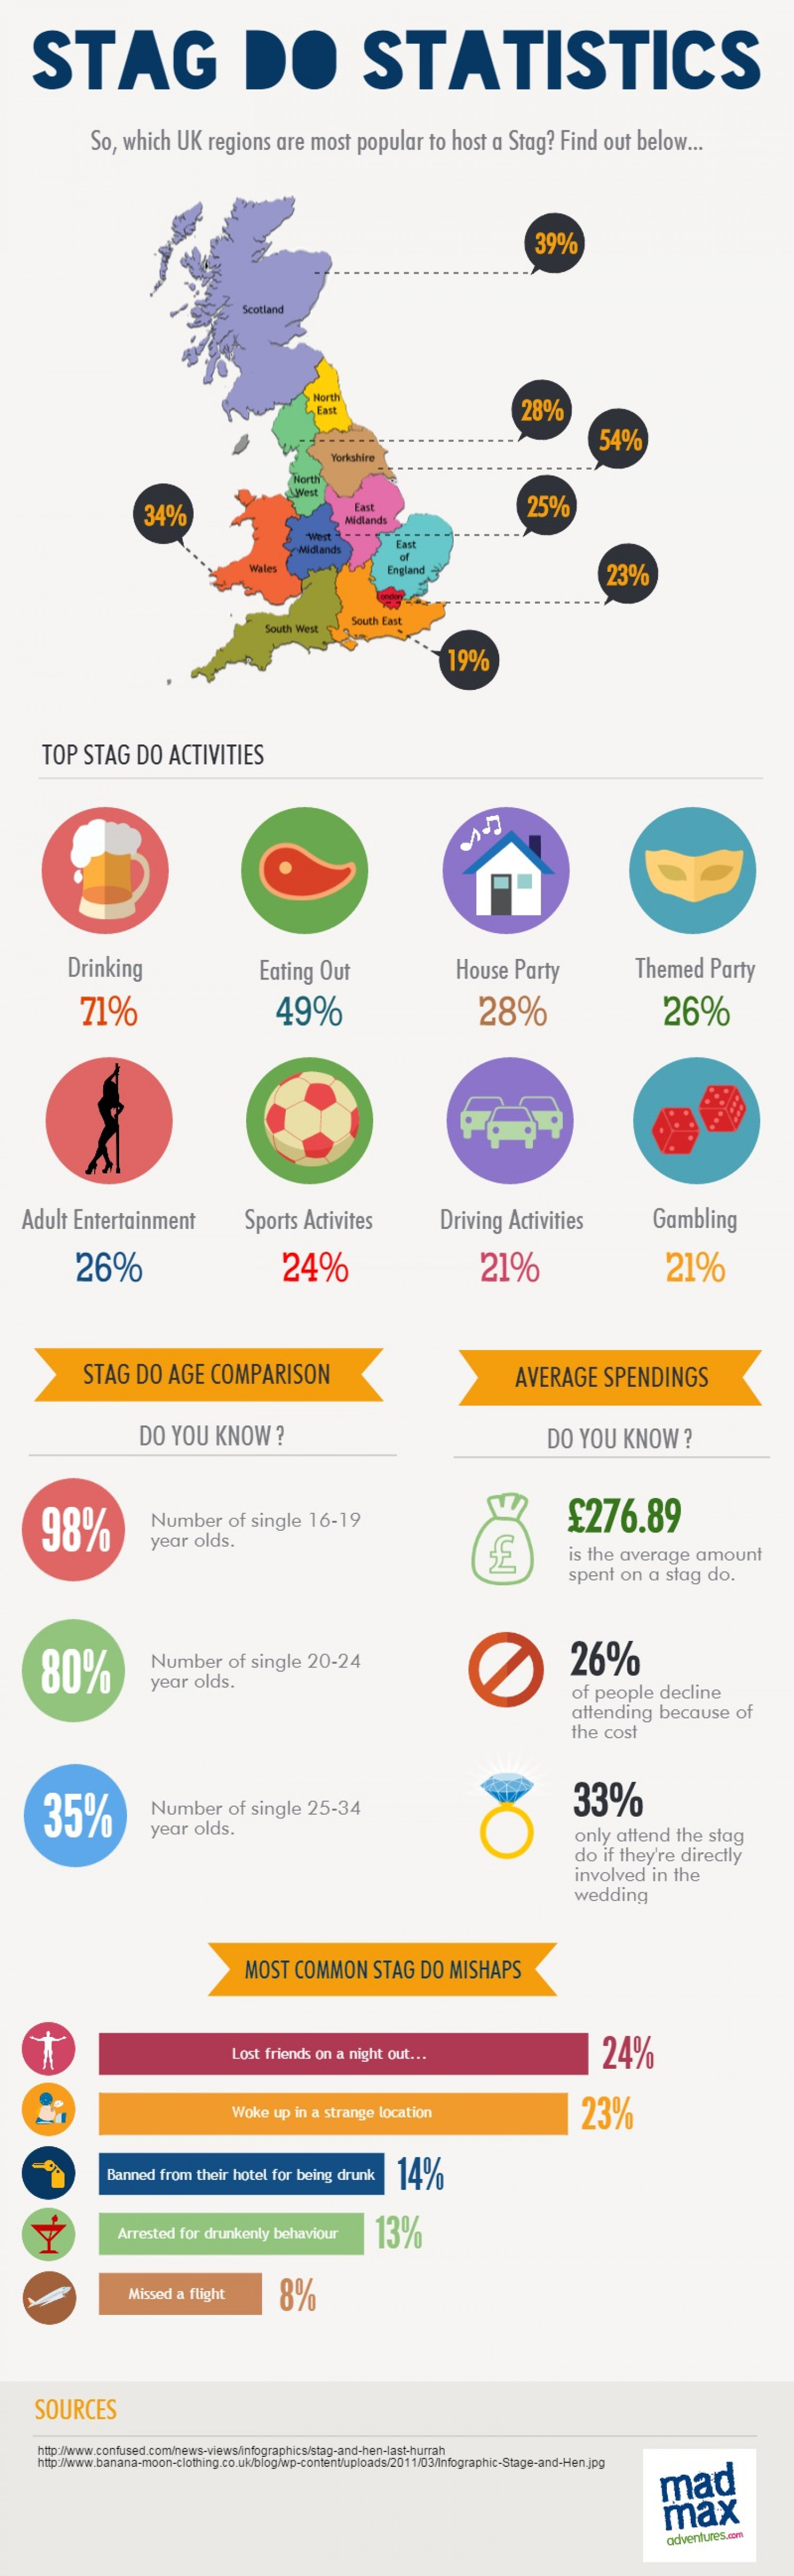 UK Stag Do Ideas and Statistics Infographic